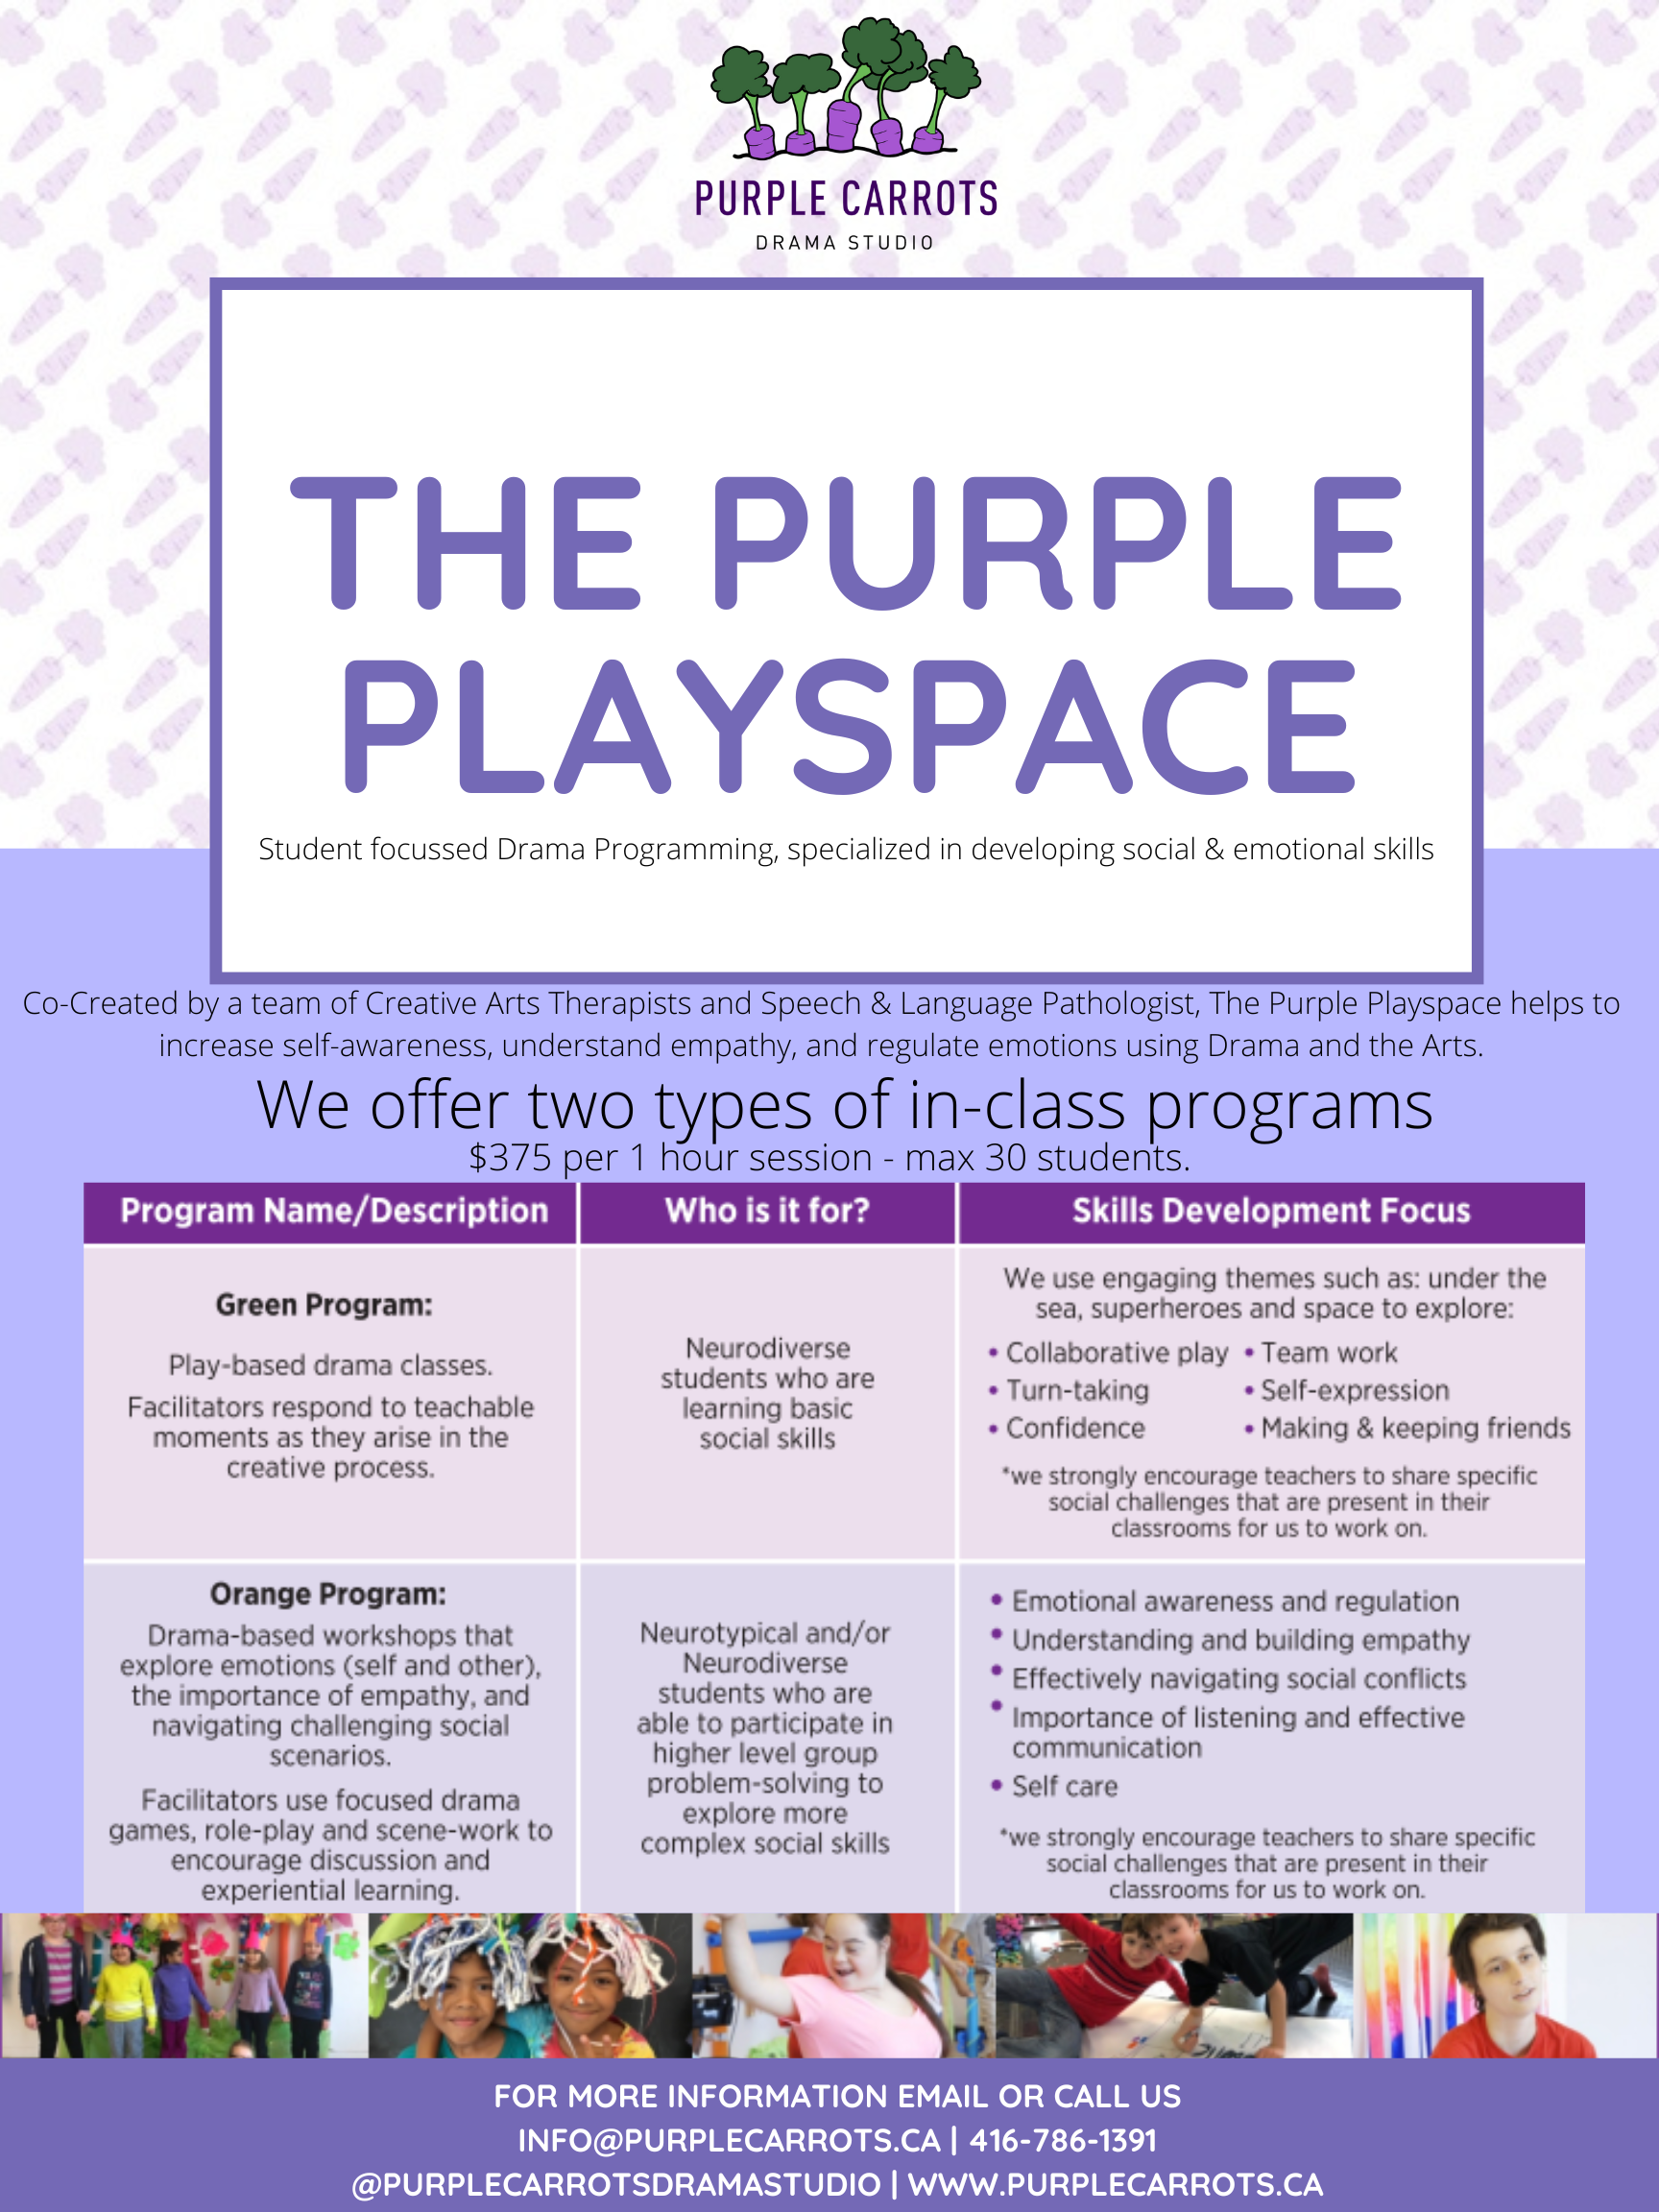 a photo of a poster for 'The Purple Playspace'